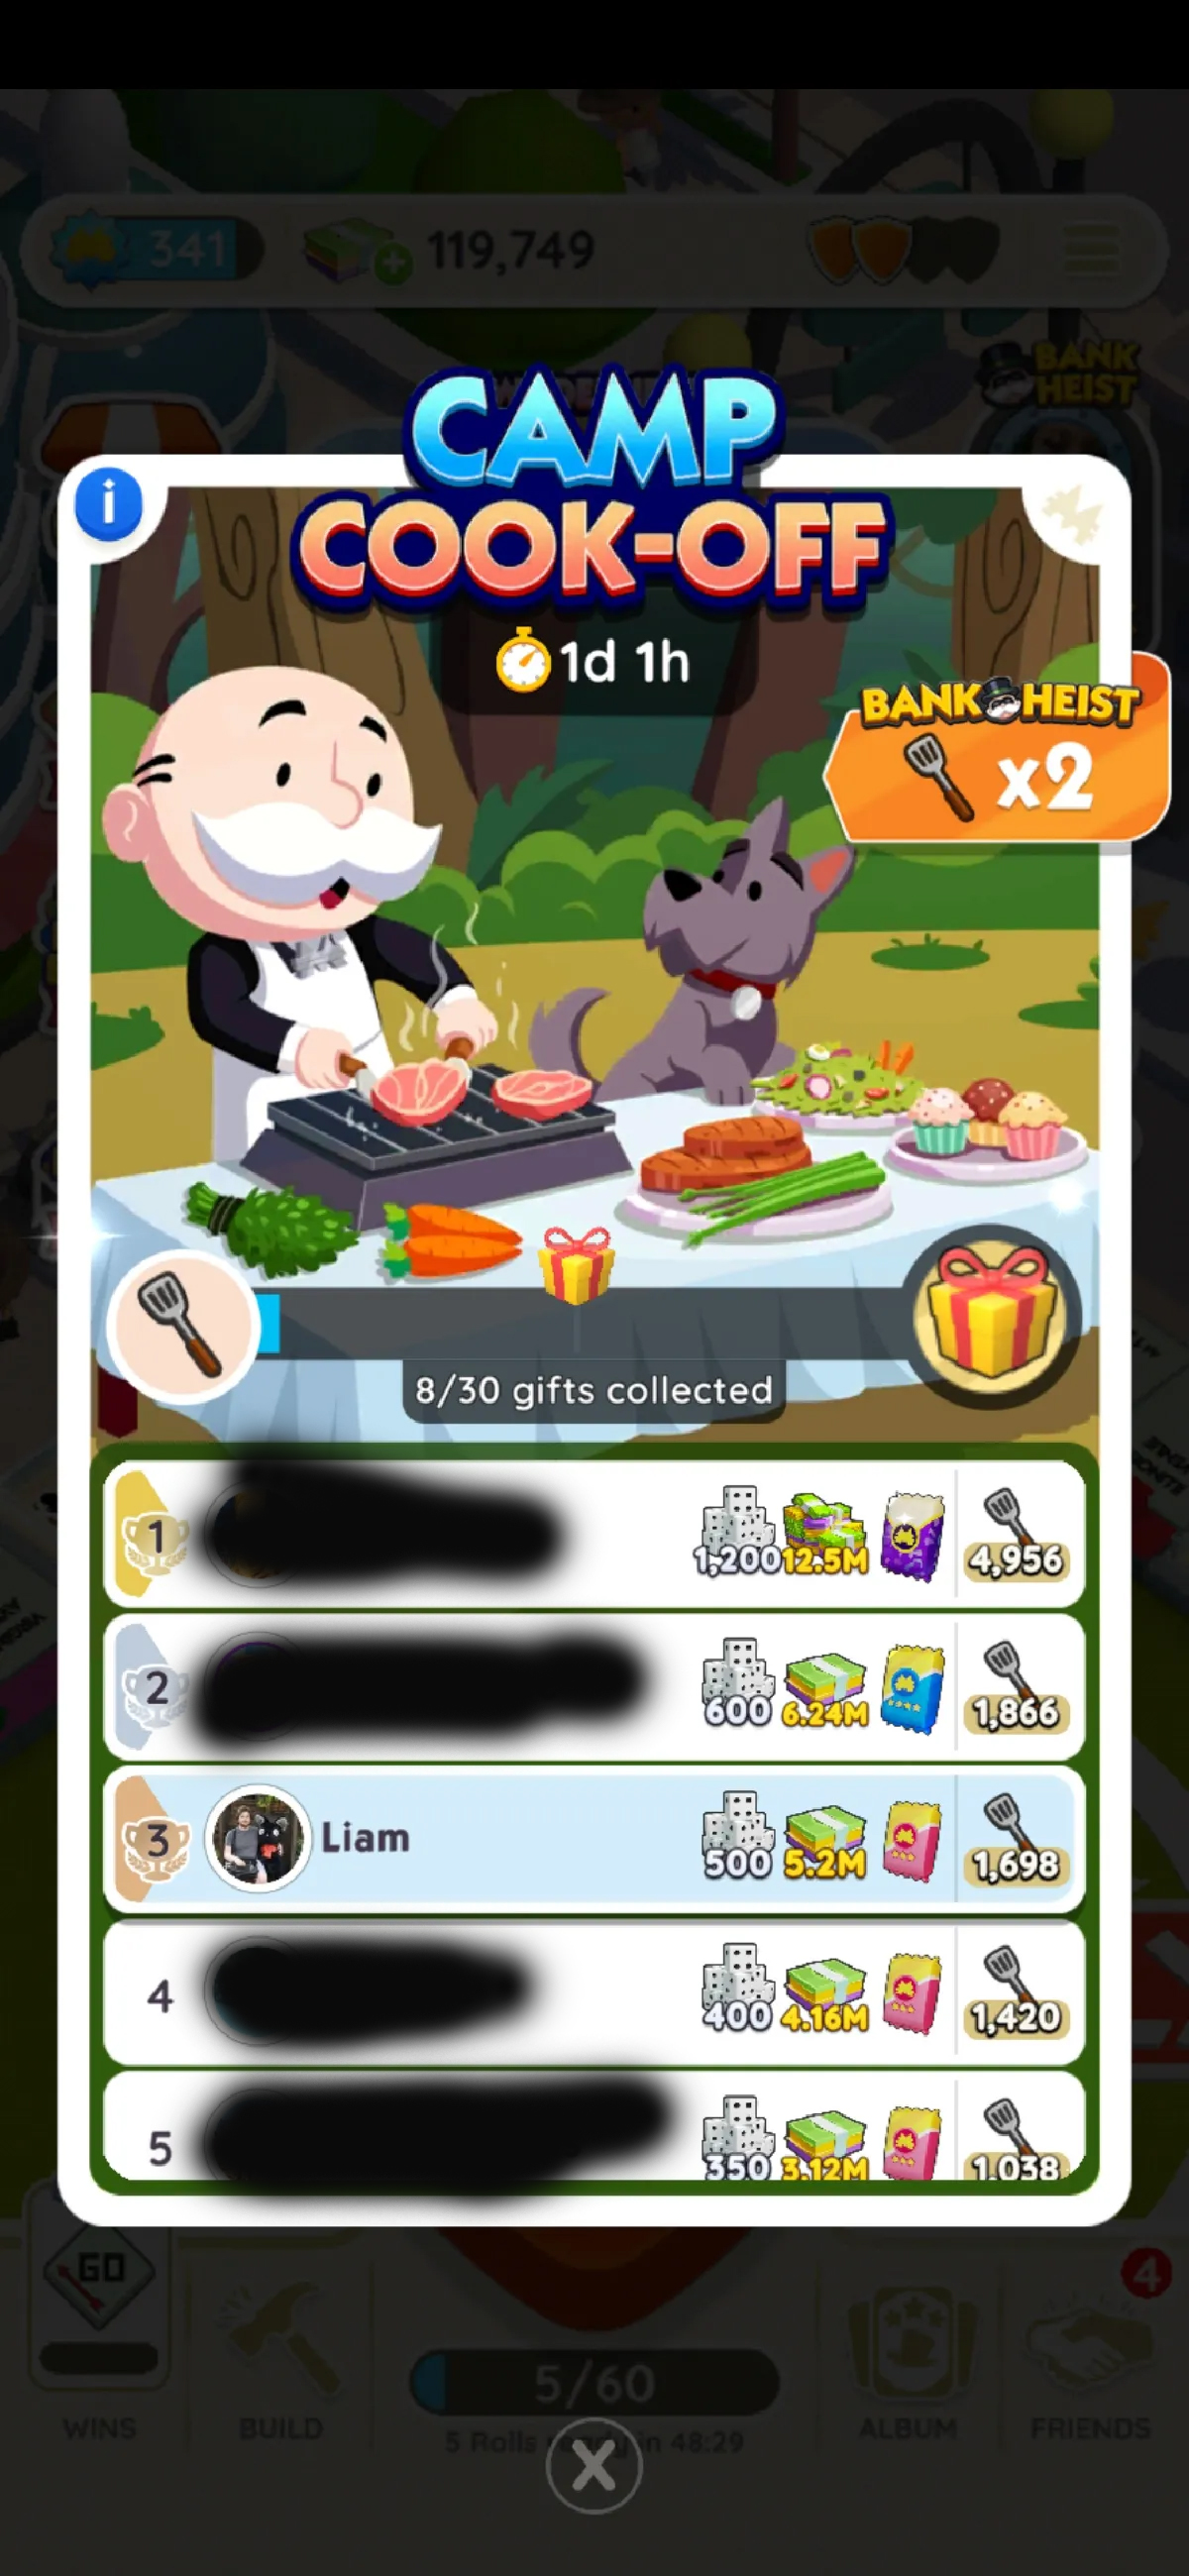 Screenshot showing the Camp Cook-Off screen for Monopoly GO as part of an article on the event's rewards and how to get them.